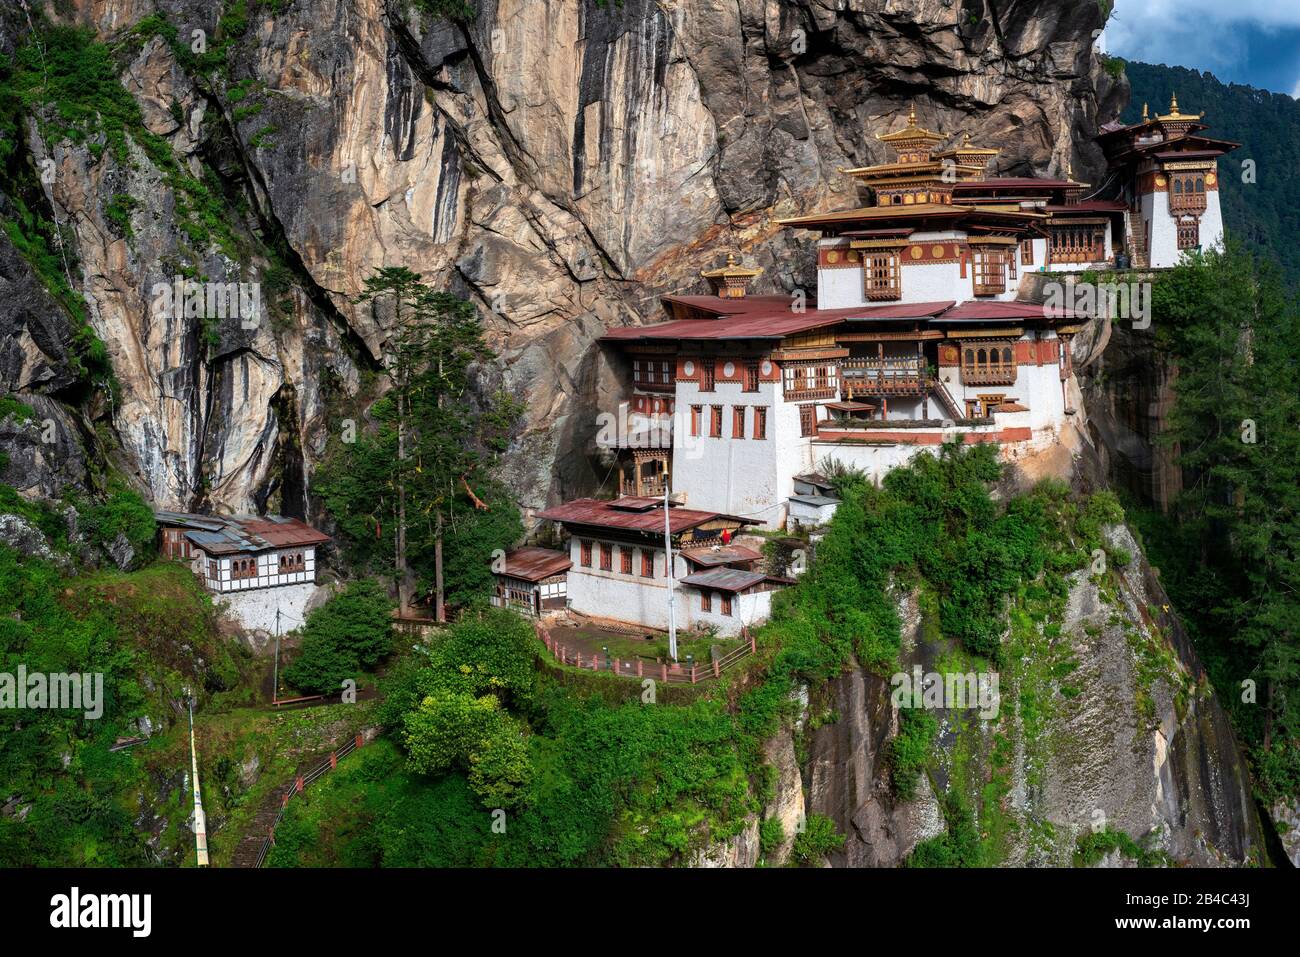 Taktsang Goemba or Tigers nest monastery in Paro valley, Bhutan, Asia. Paro Taktsang or Taktsang Palphug Monastery and the Tiger's Nest is a prominent Stock Photo